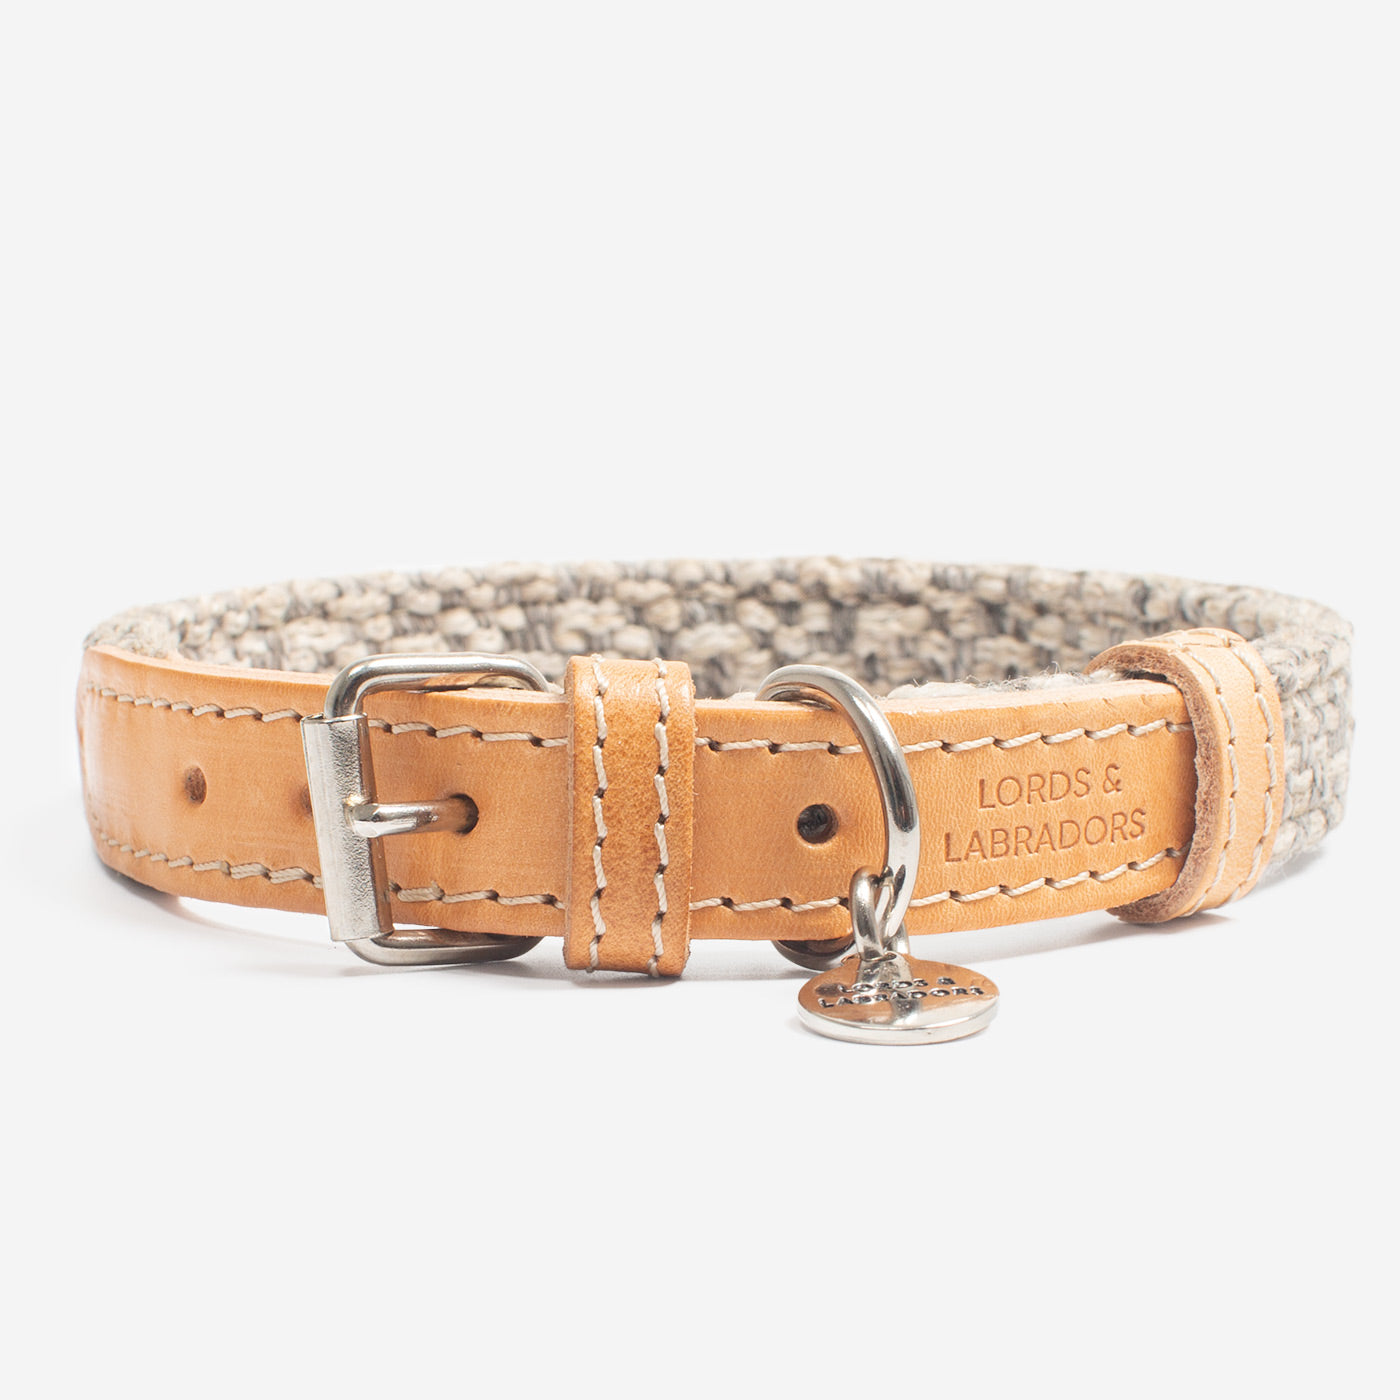 Discover dog walking luxury with our handcrafted Italian dog collar in beautiful pebble with woven grey fabric! The perfect collar for dogs available now at Lords & Labradors US